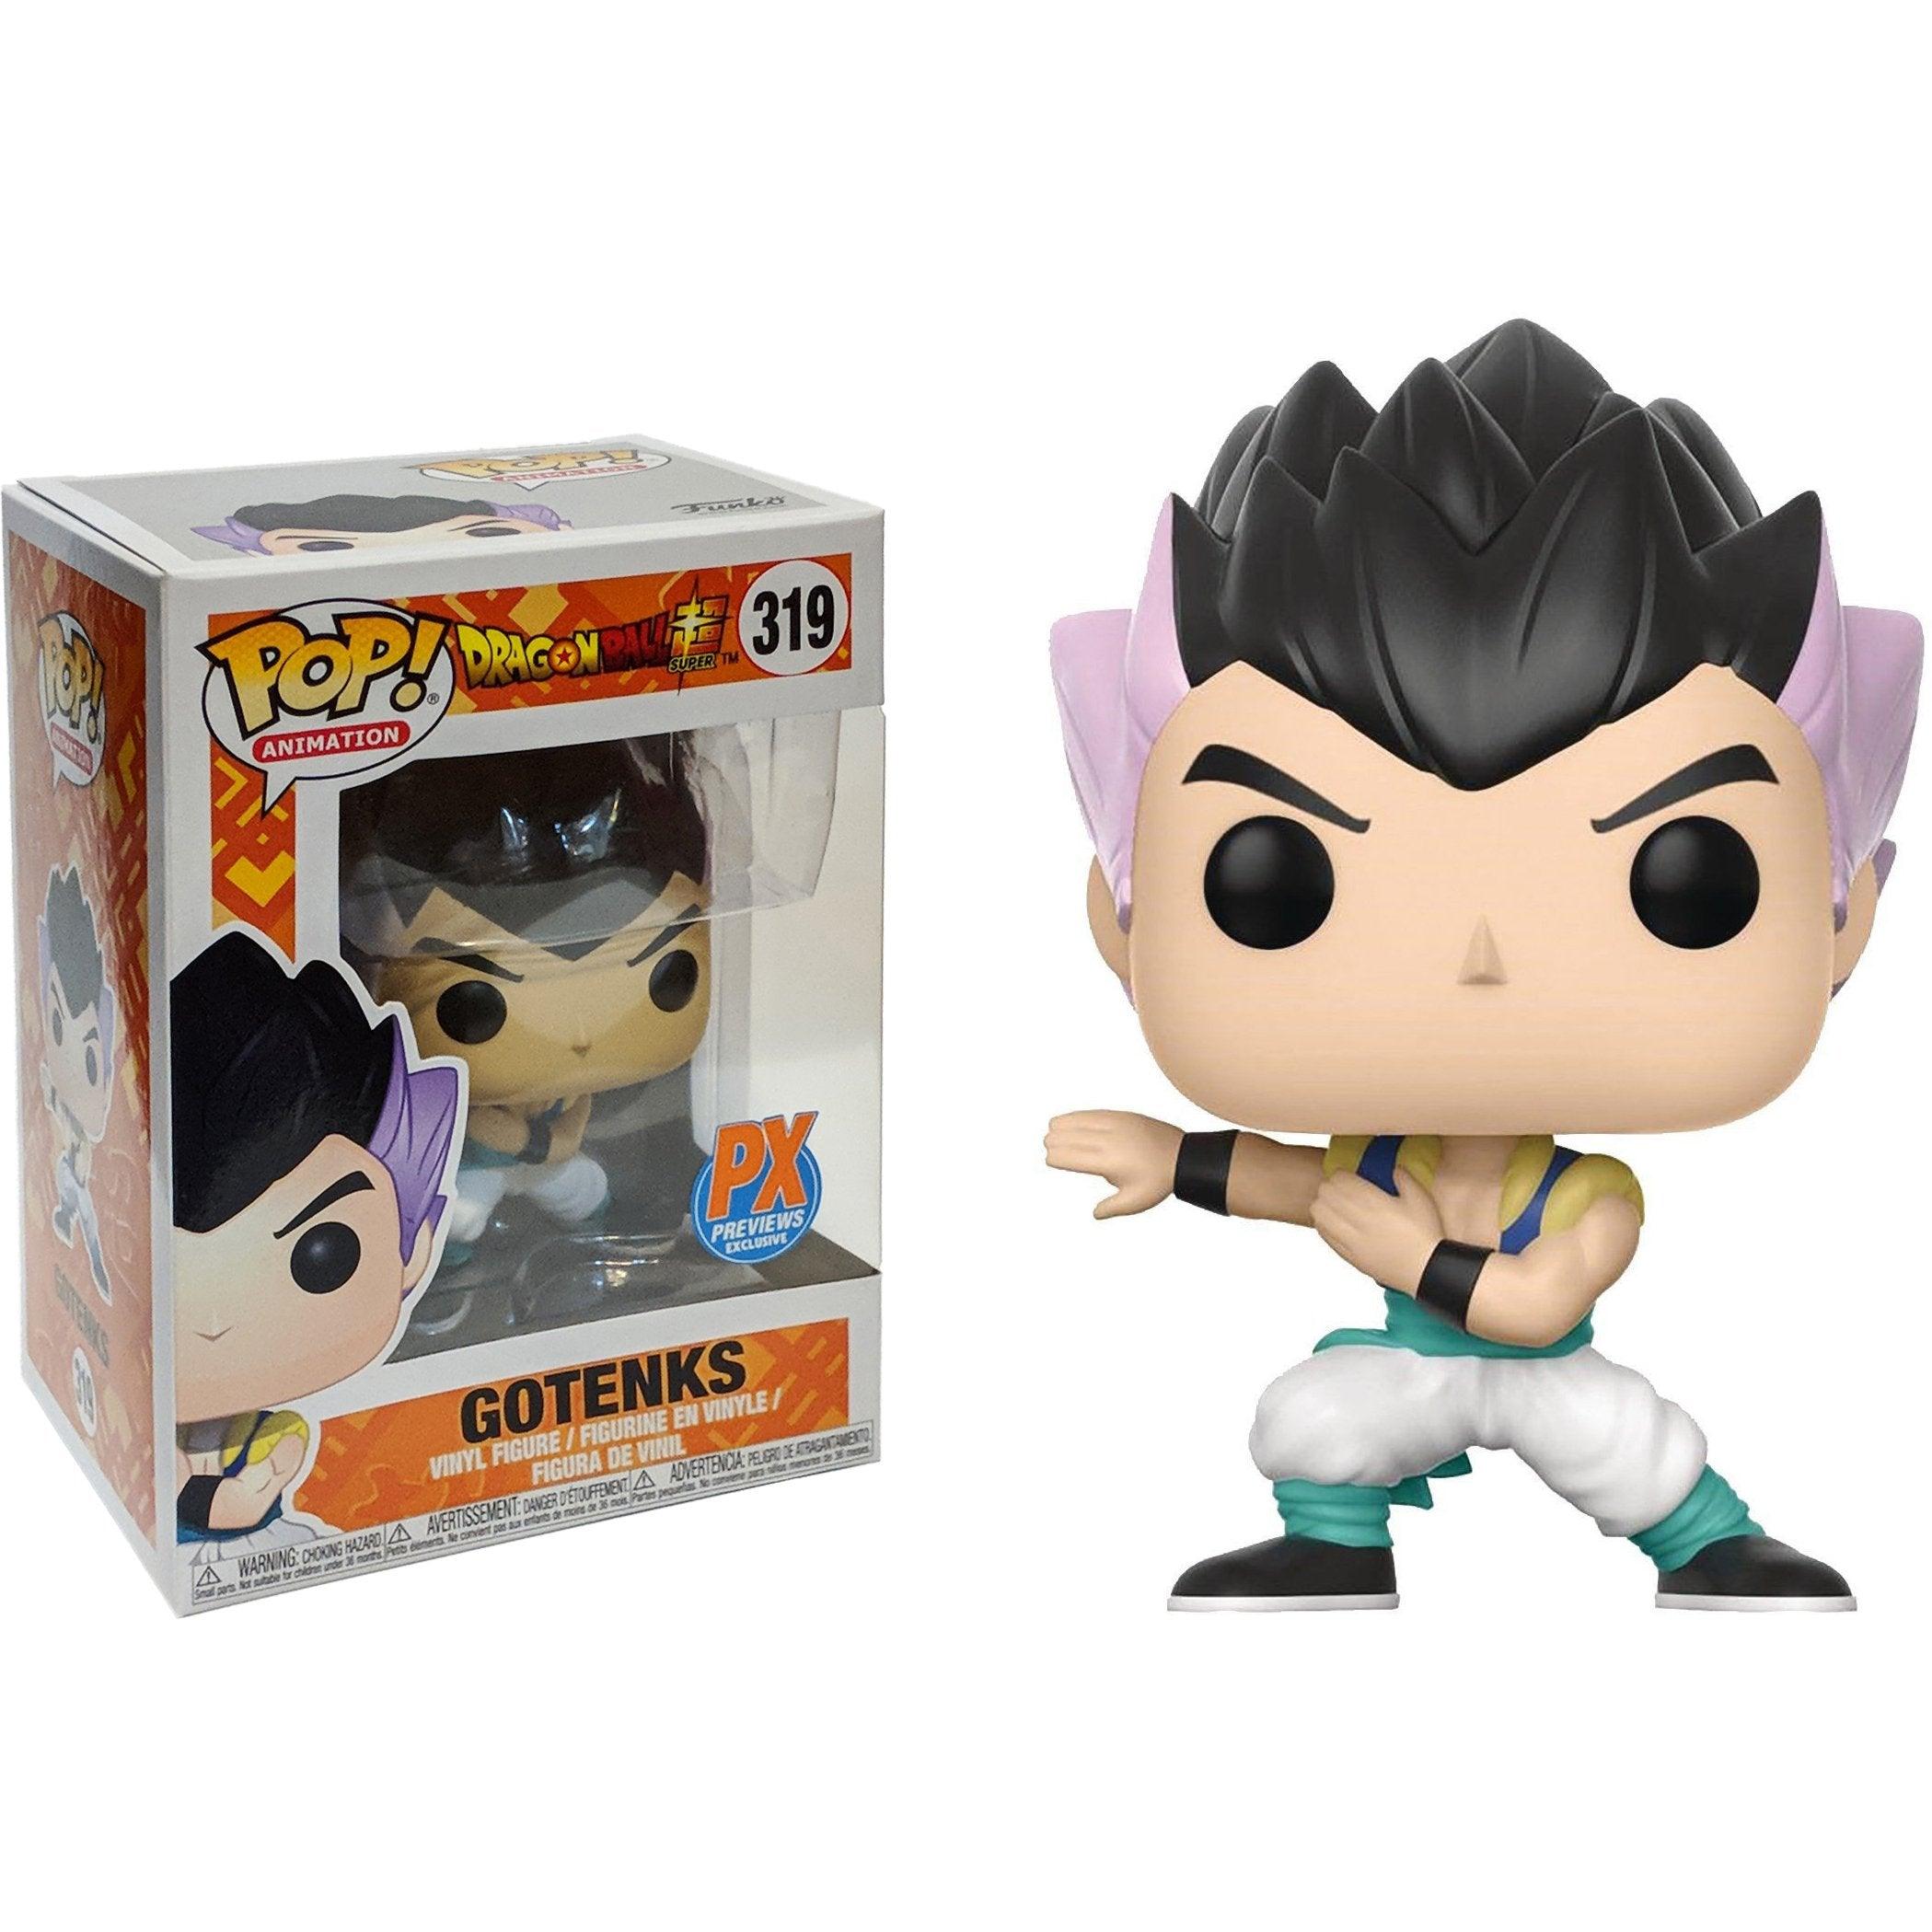 Pop! Animation - Dragon Ball Super - Gotenks - #319 - PX Previews EXCLUSIVE - Hobby Champion Inc